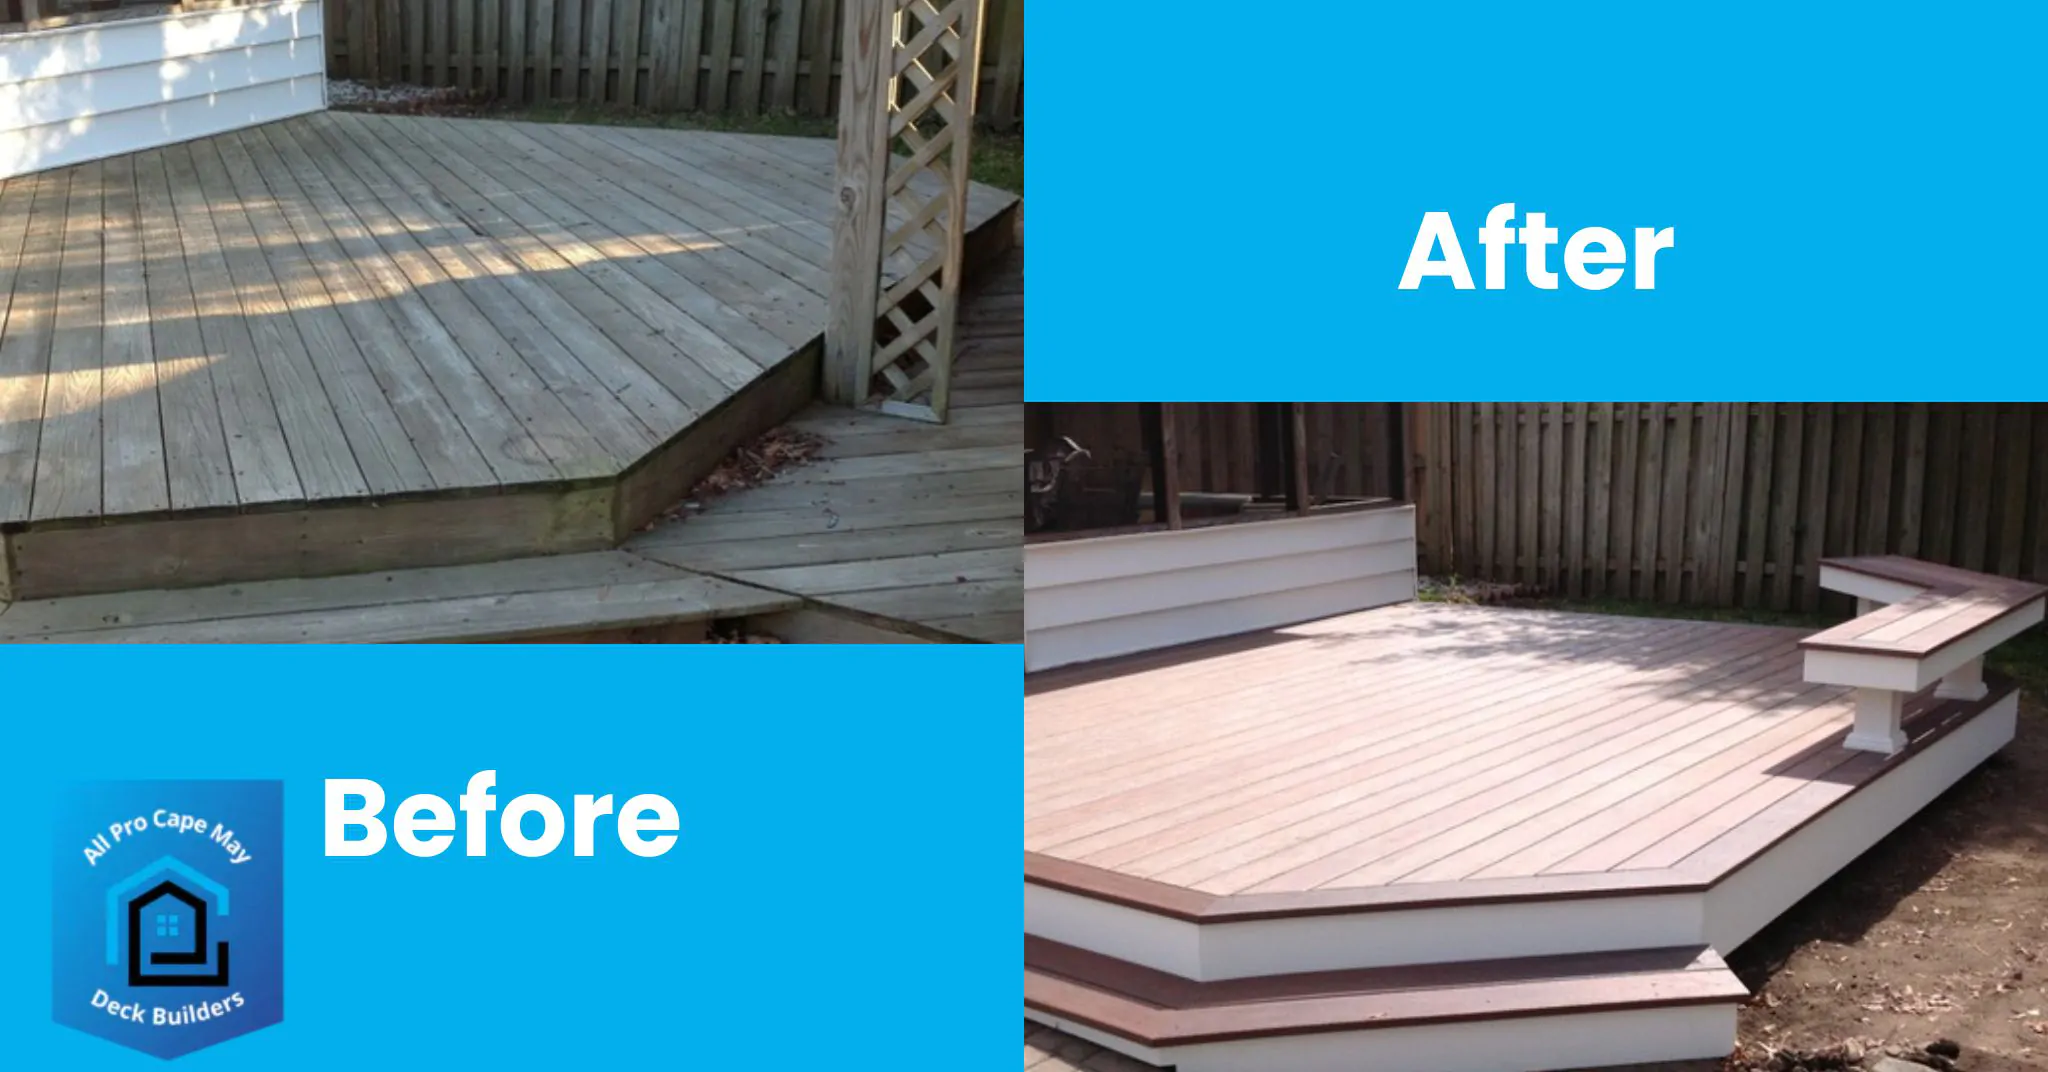 Before and After Patios Design Service - All Pro Cape May Deck Builders